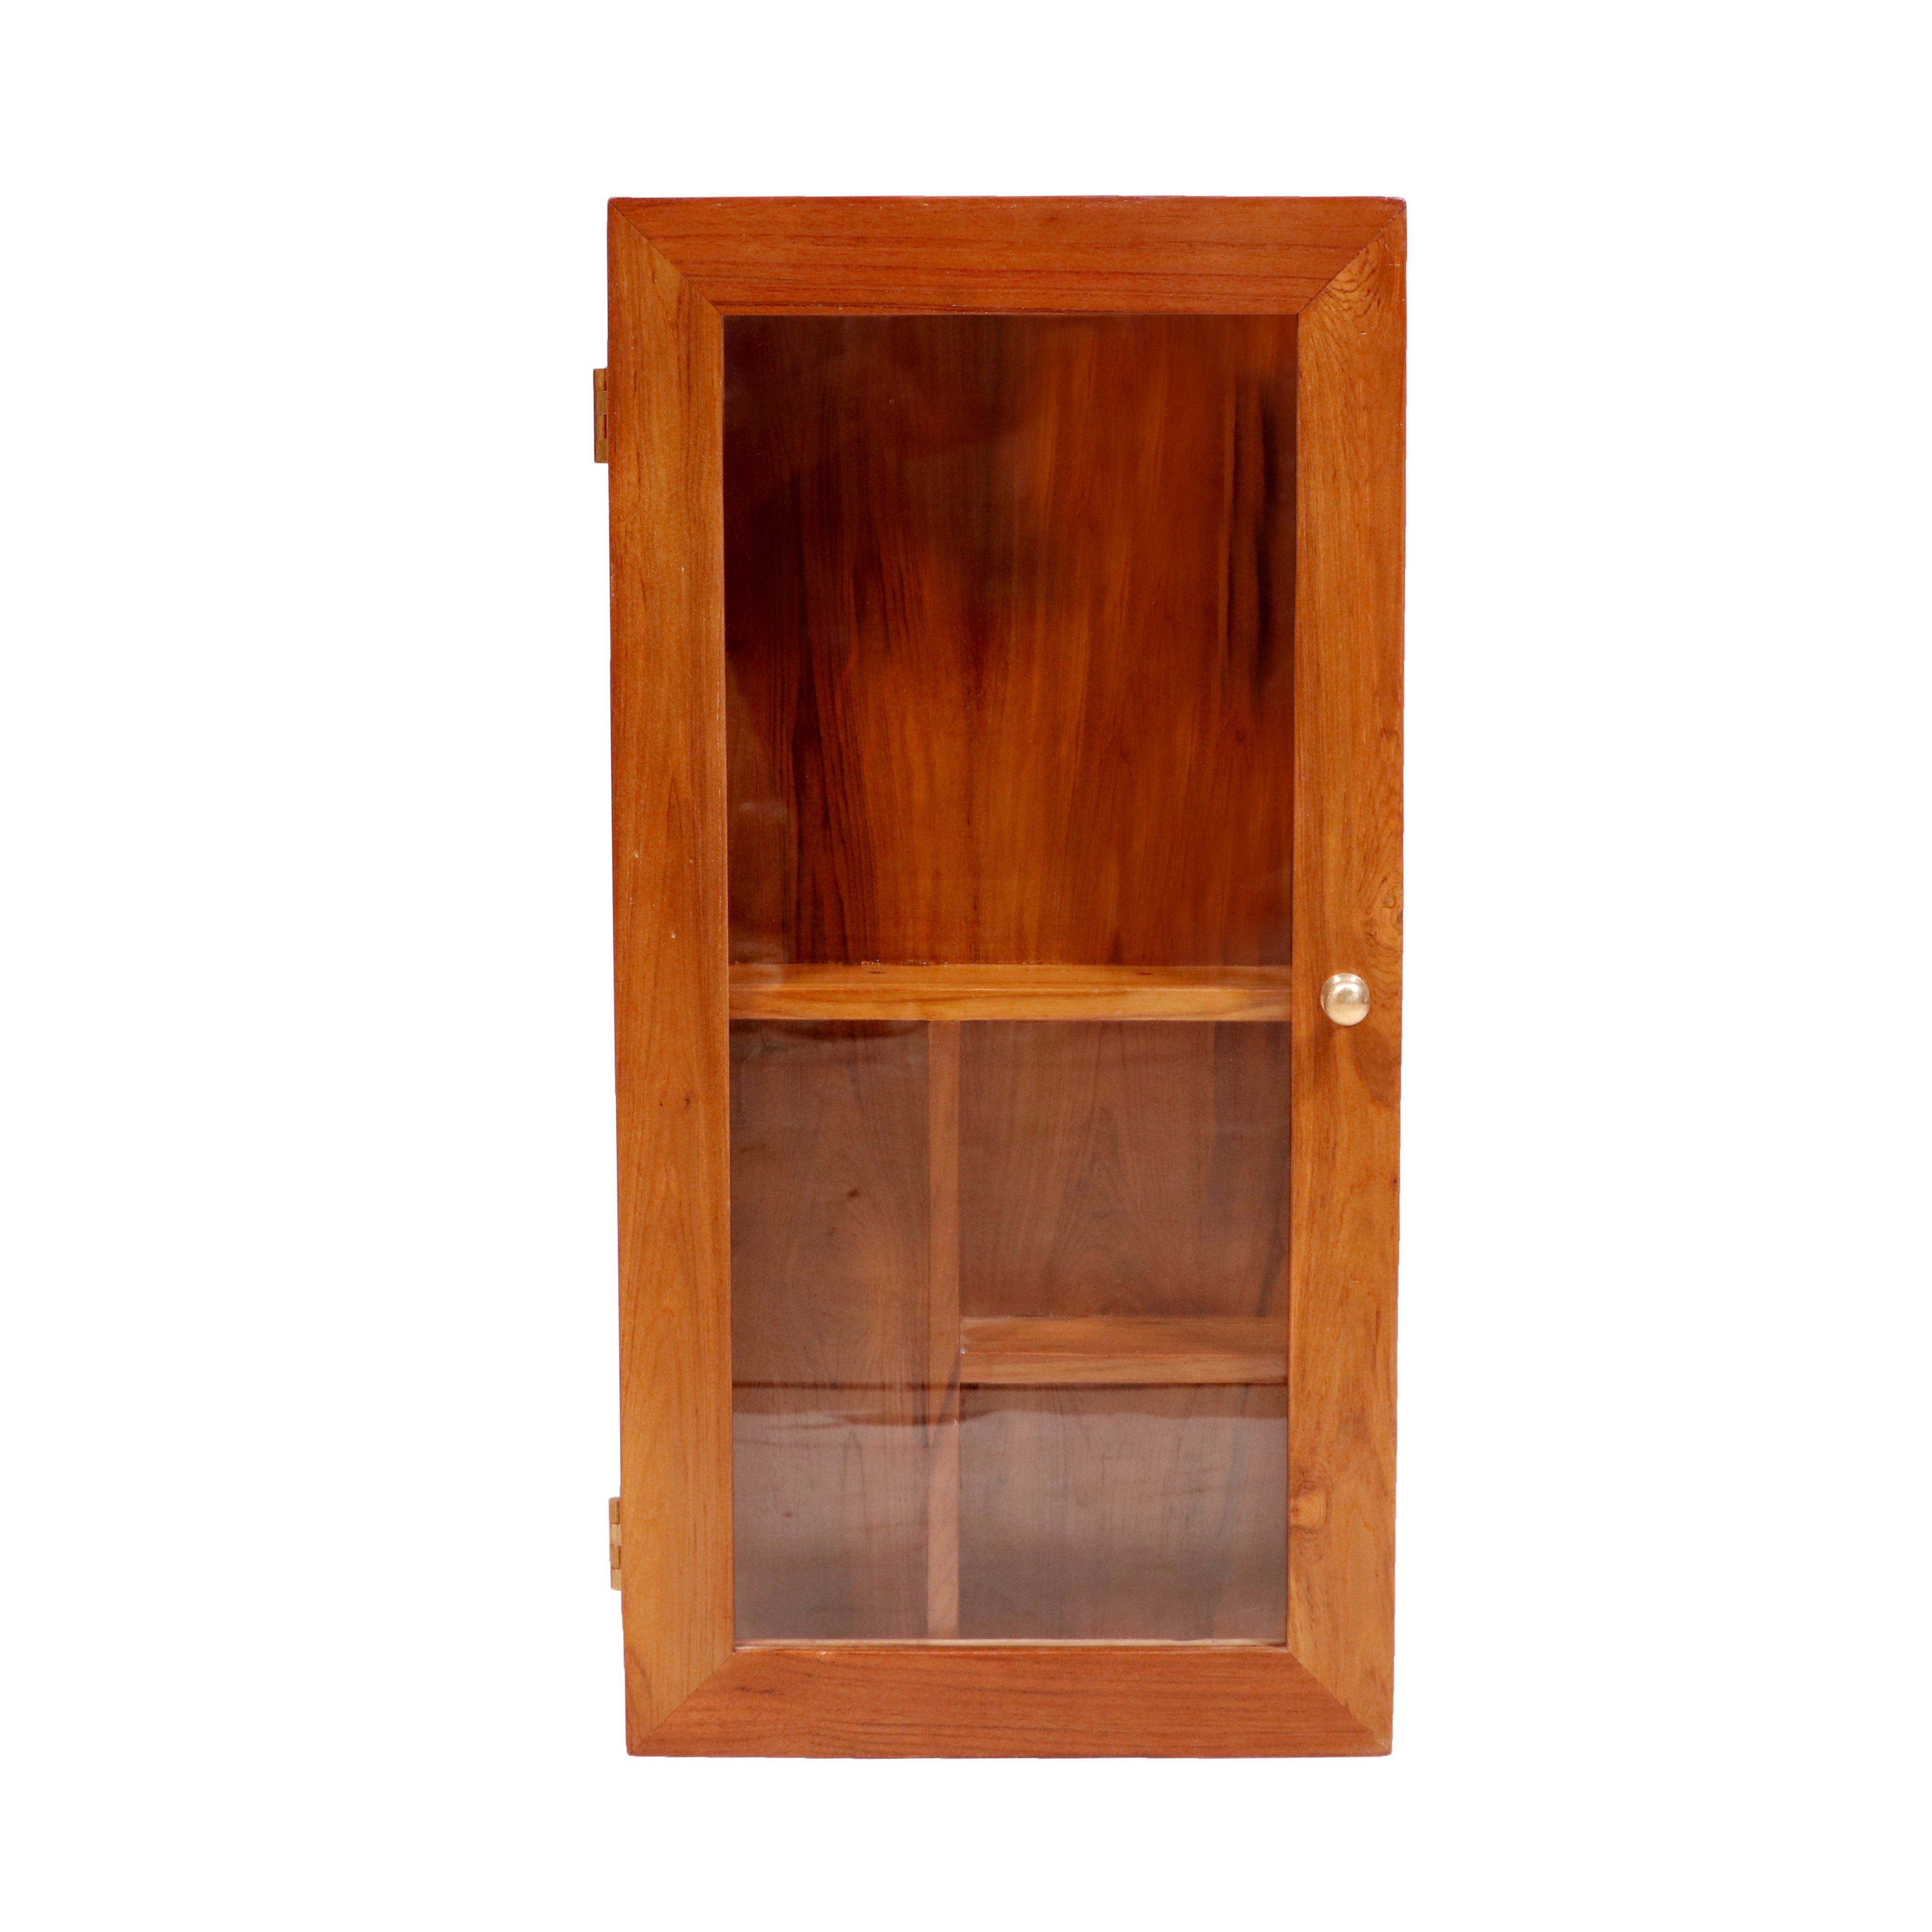 Solid teak wood Wall hanging Compact cabinet Default Title Wall Cabinet